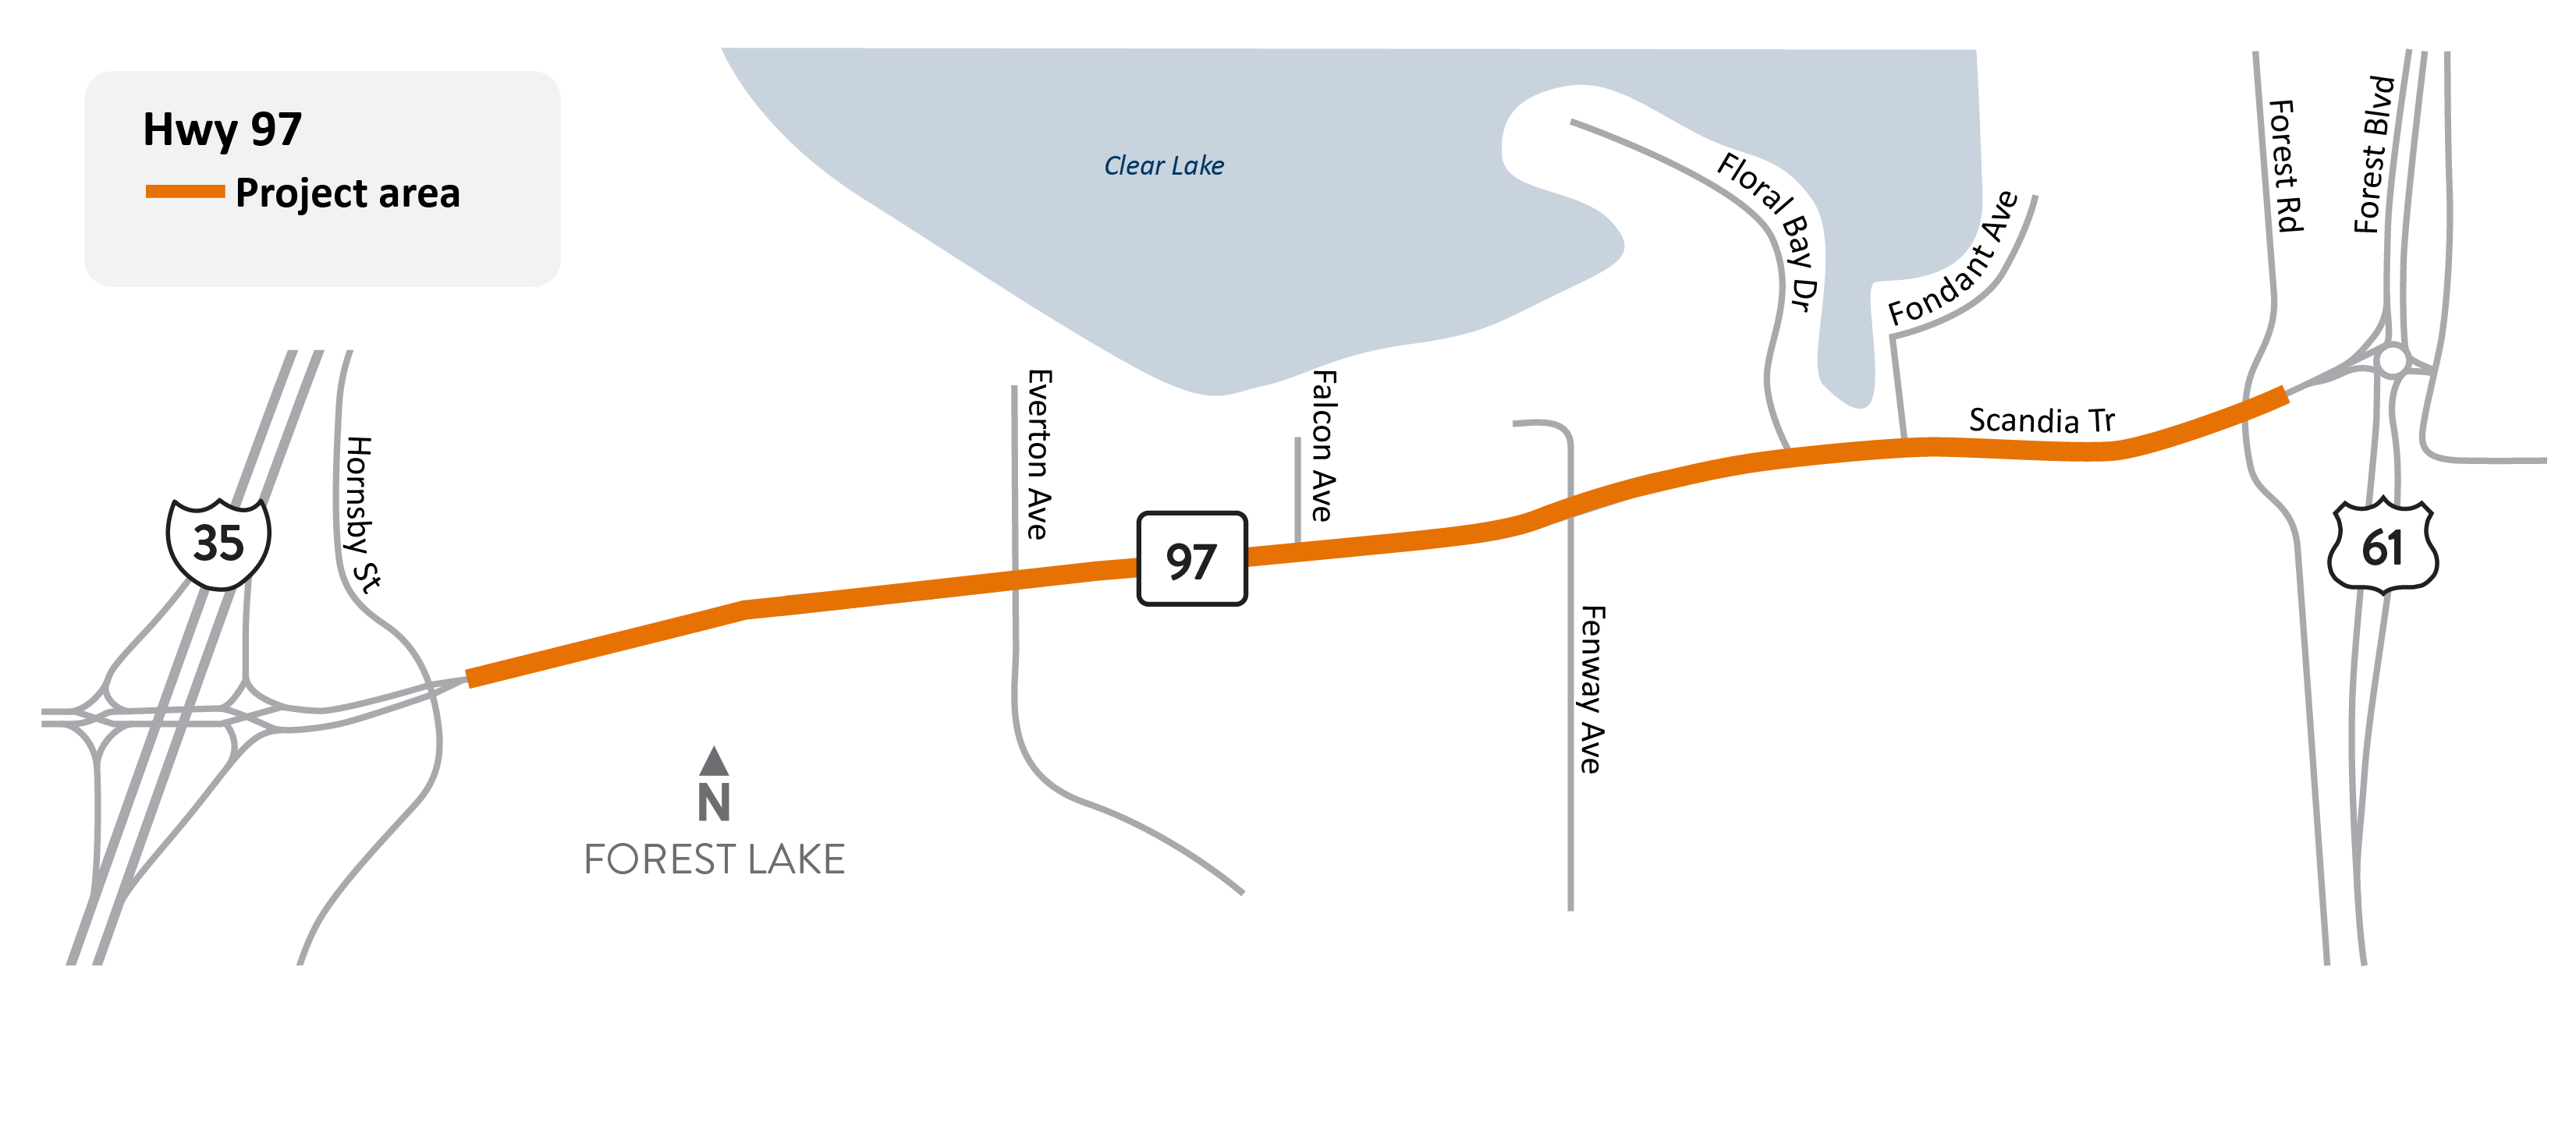 Highway 97 in Forest Lake project area map.